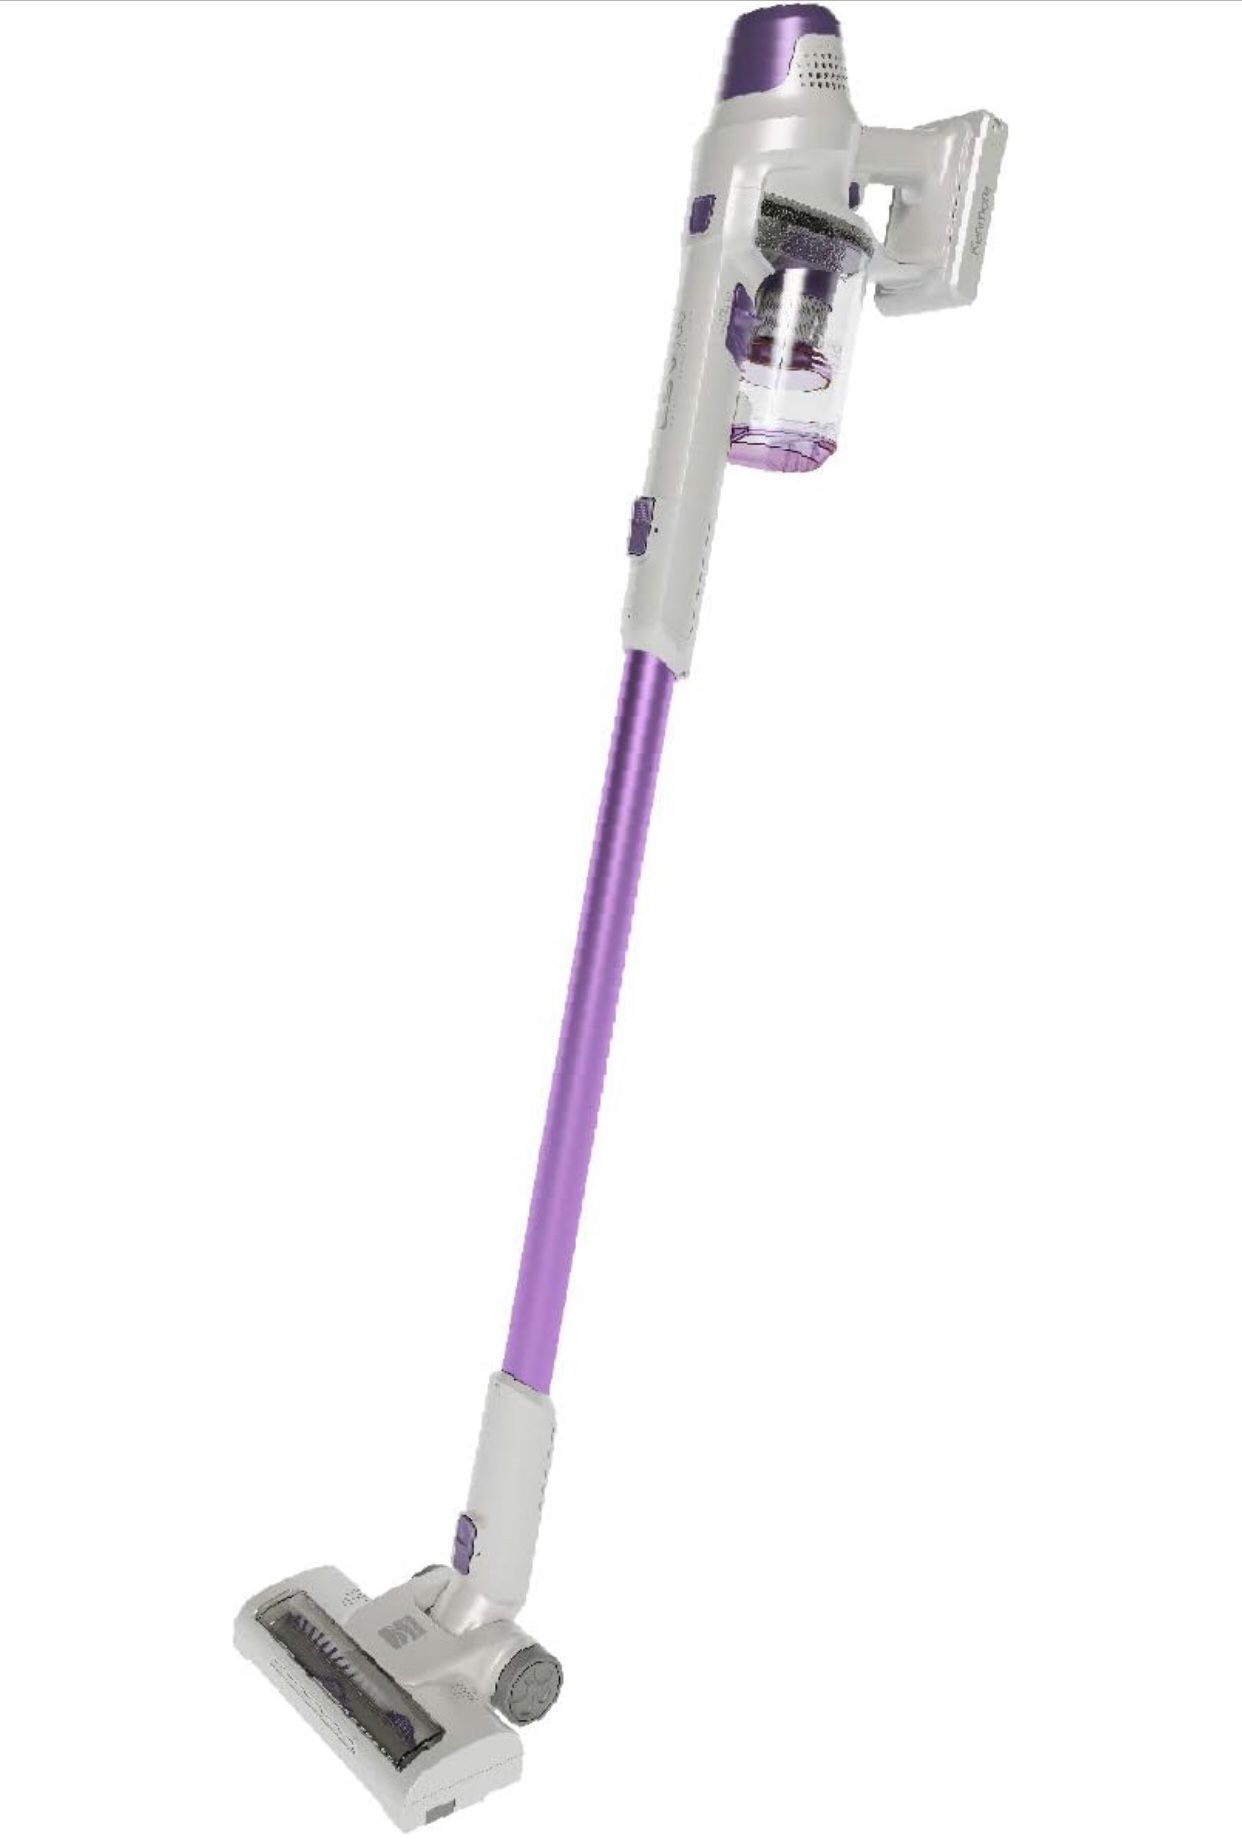 Kenmore 21.6V Lightweight 2-in-1 Vacuum, Hybrid, HEPA Filter, Lithium Ion Battery, 2-Speed Settings, Combo Tool Cordless Stick Vac, Purple